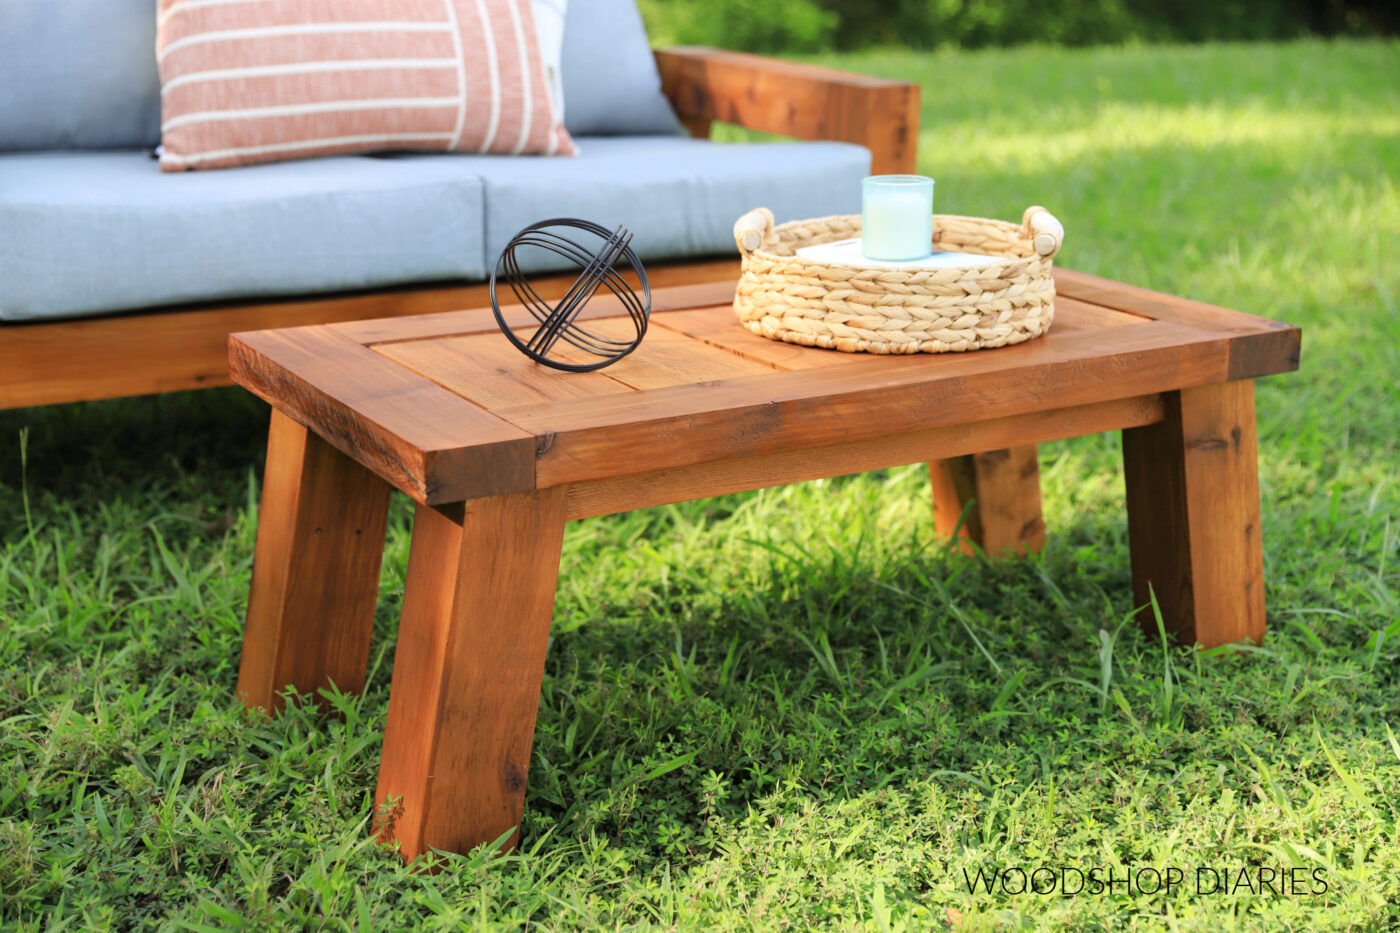 Beautiful wooden outdoor coffee table with wicker tray in front of wooden loveseat in grassy area